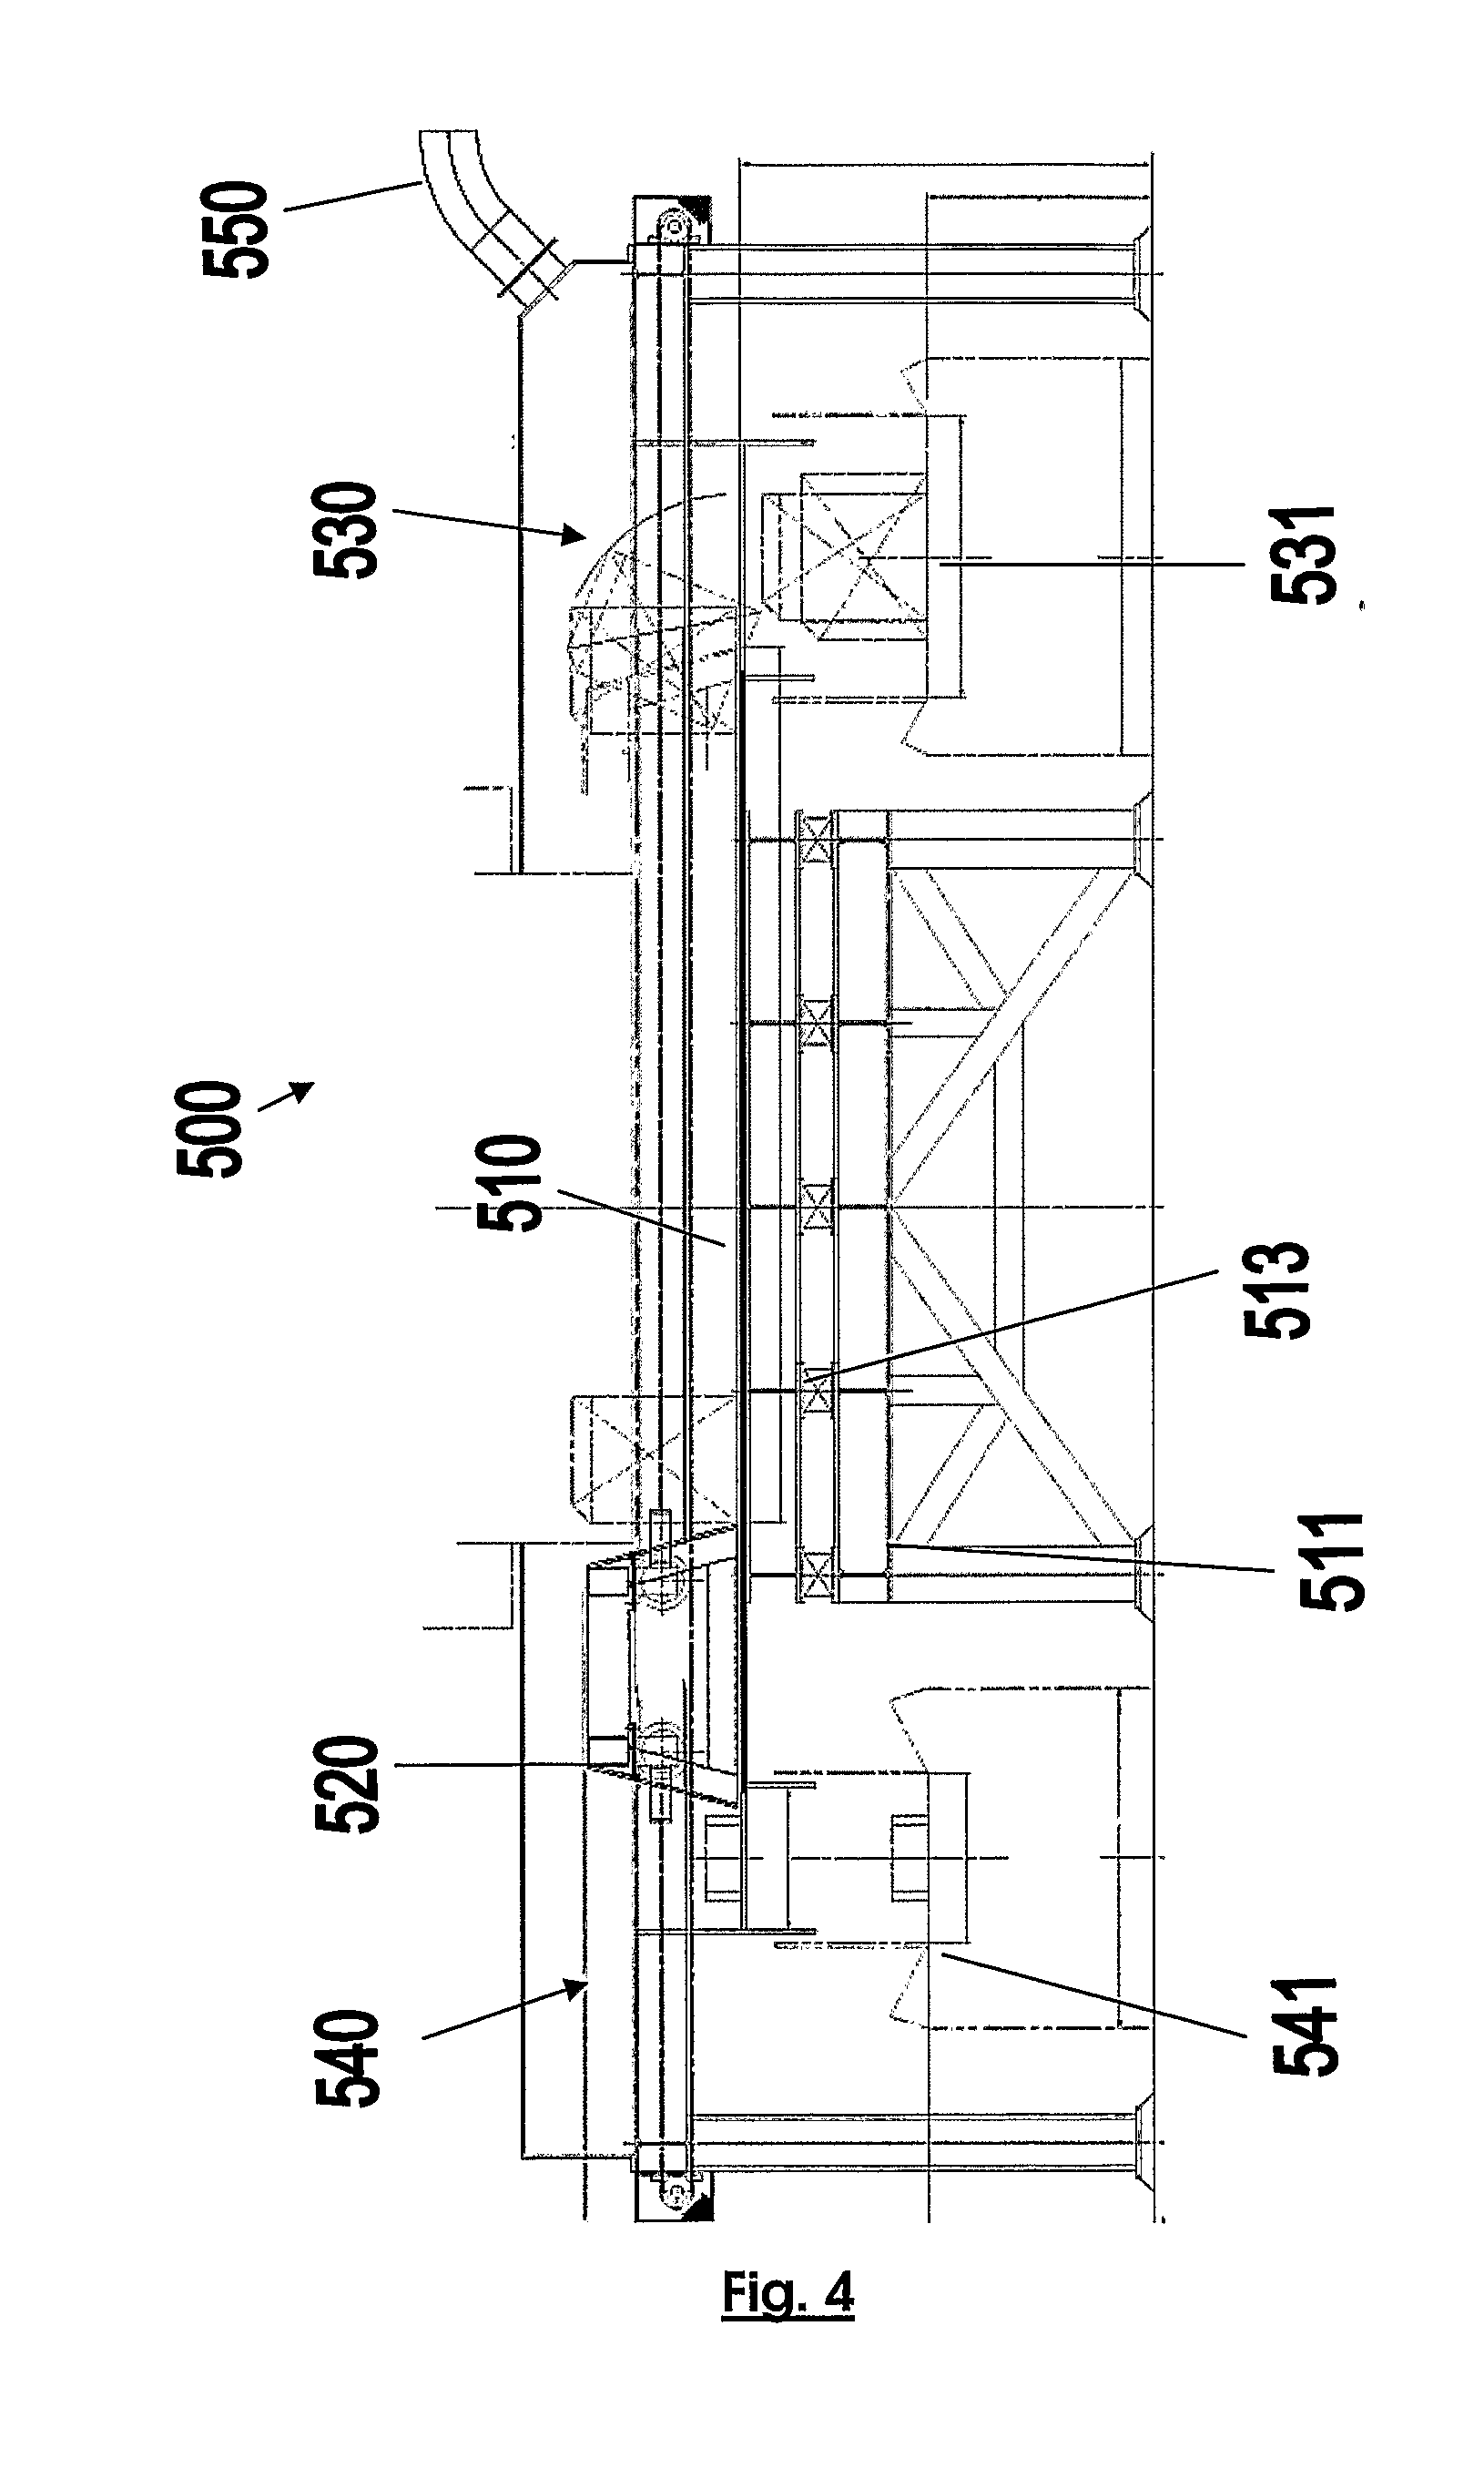 Method for Removing Anode Residues Attached to Spent Anodes Coming from Melt Bath Electrolysis Potlines